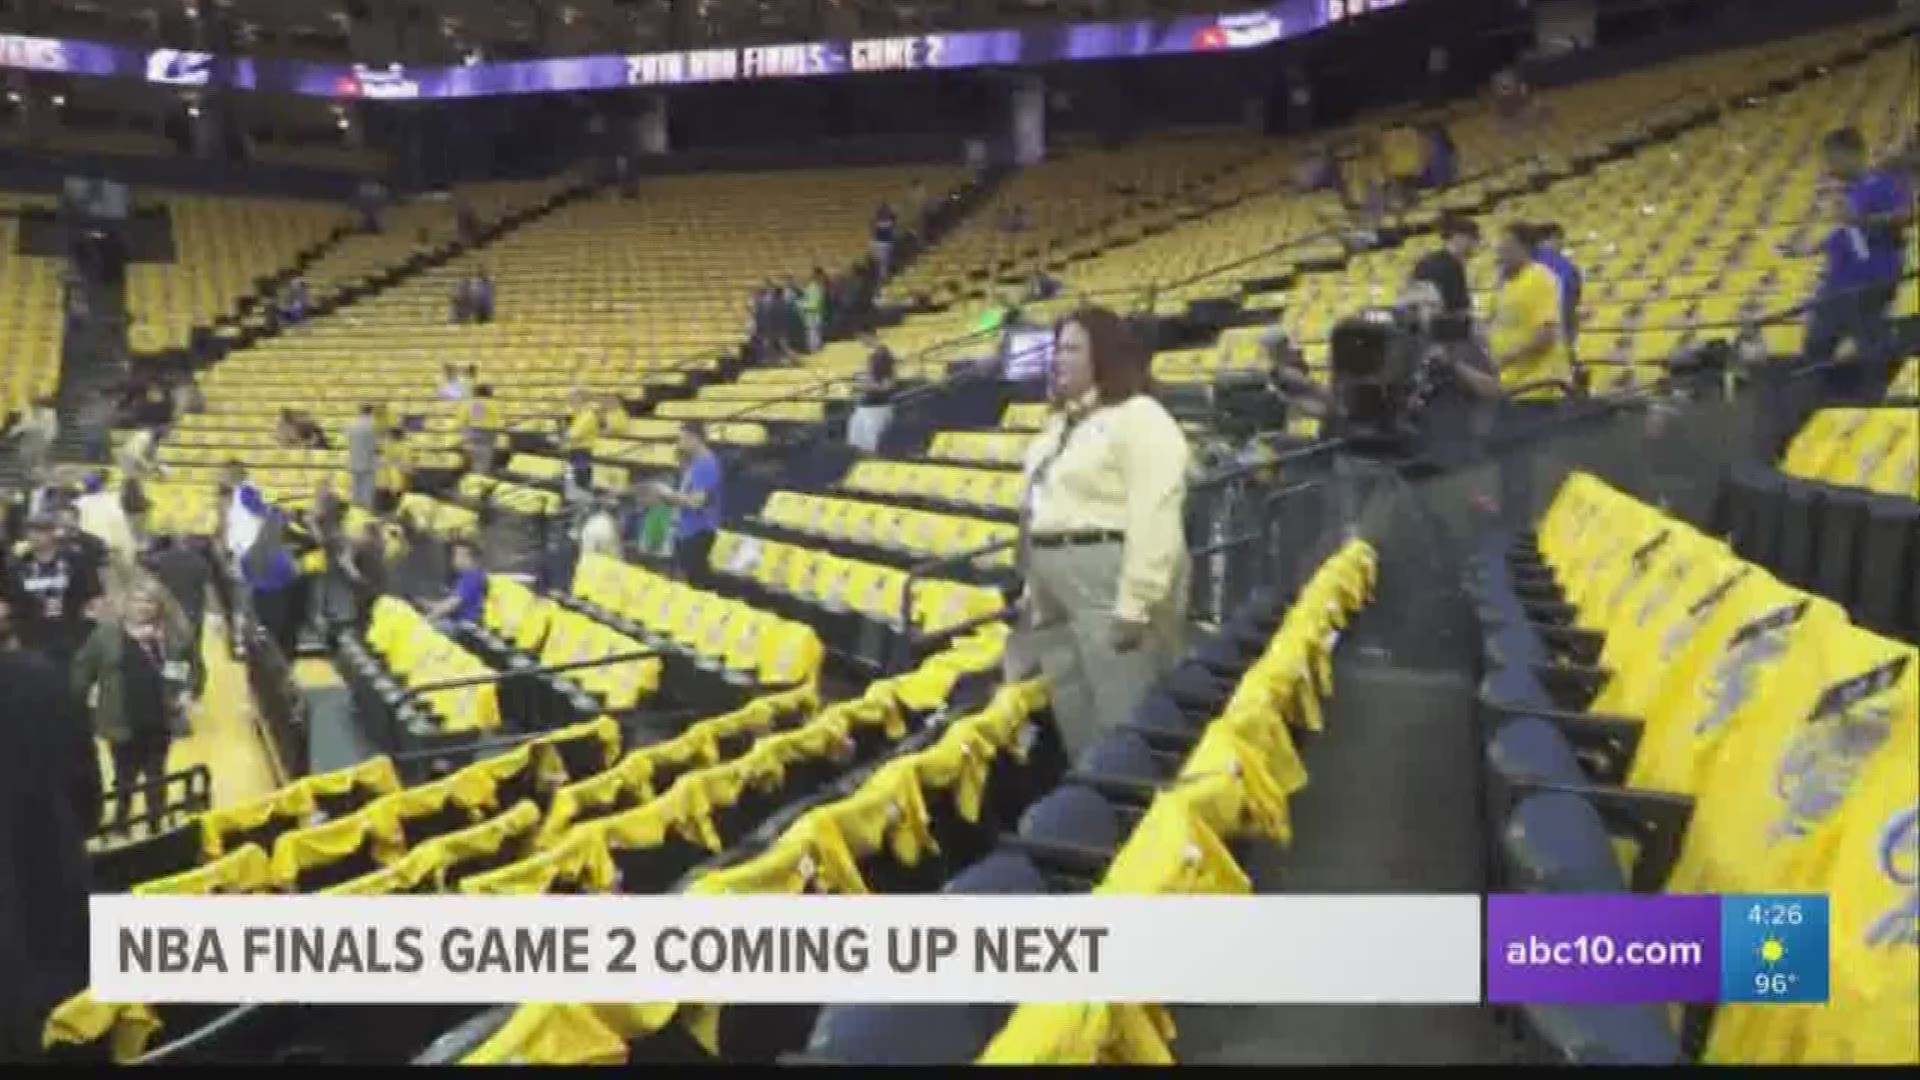 Warriors fans were ready for Game 2 of NBA Finals in Oakland after a thrilling Game 1.